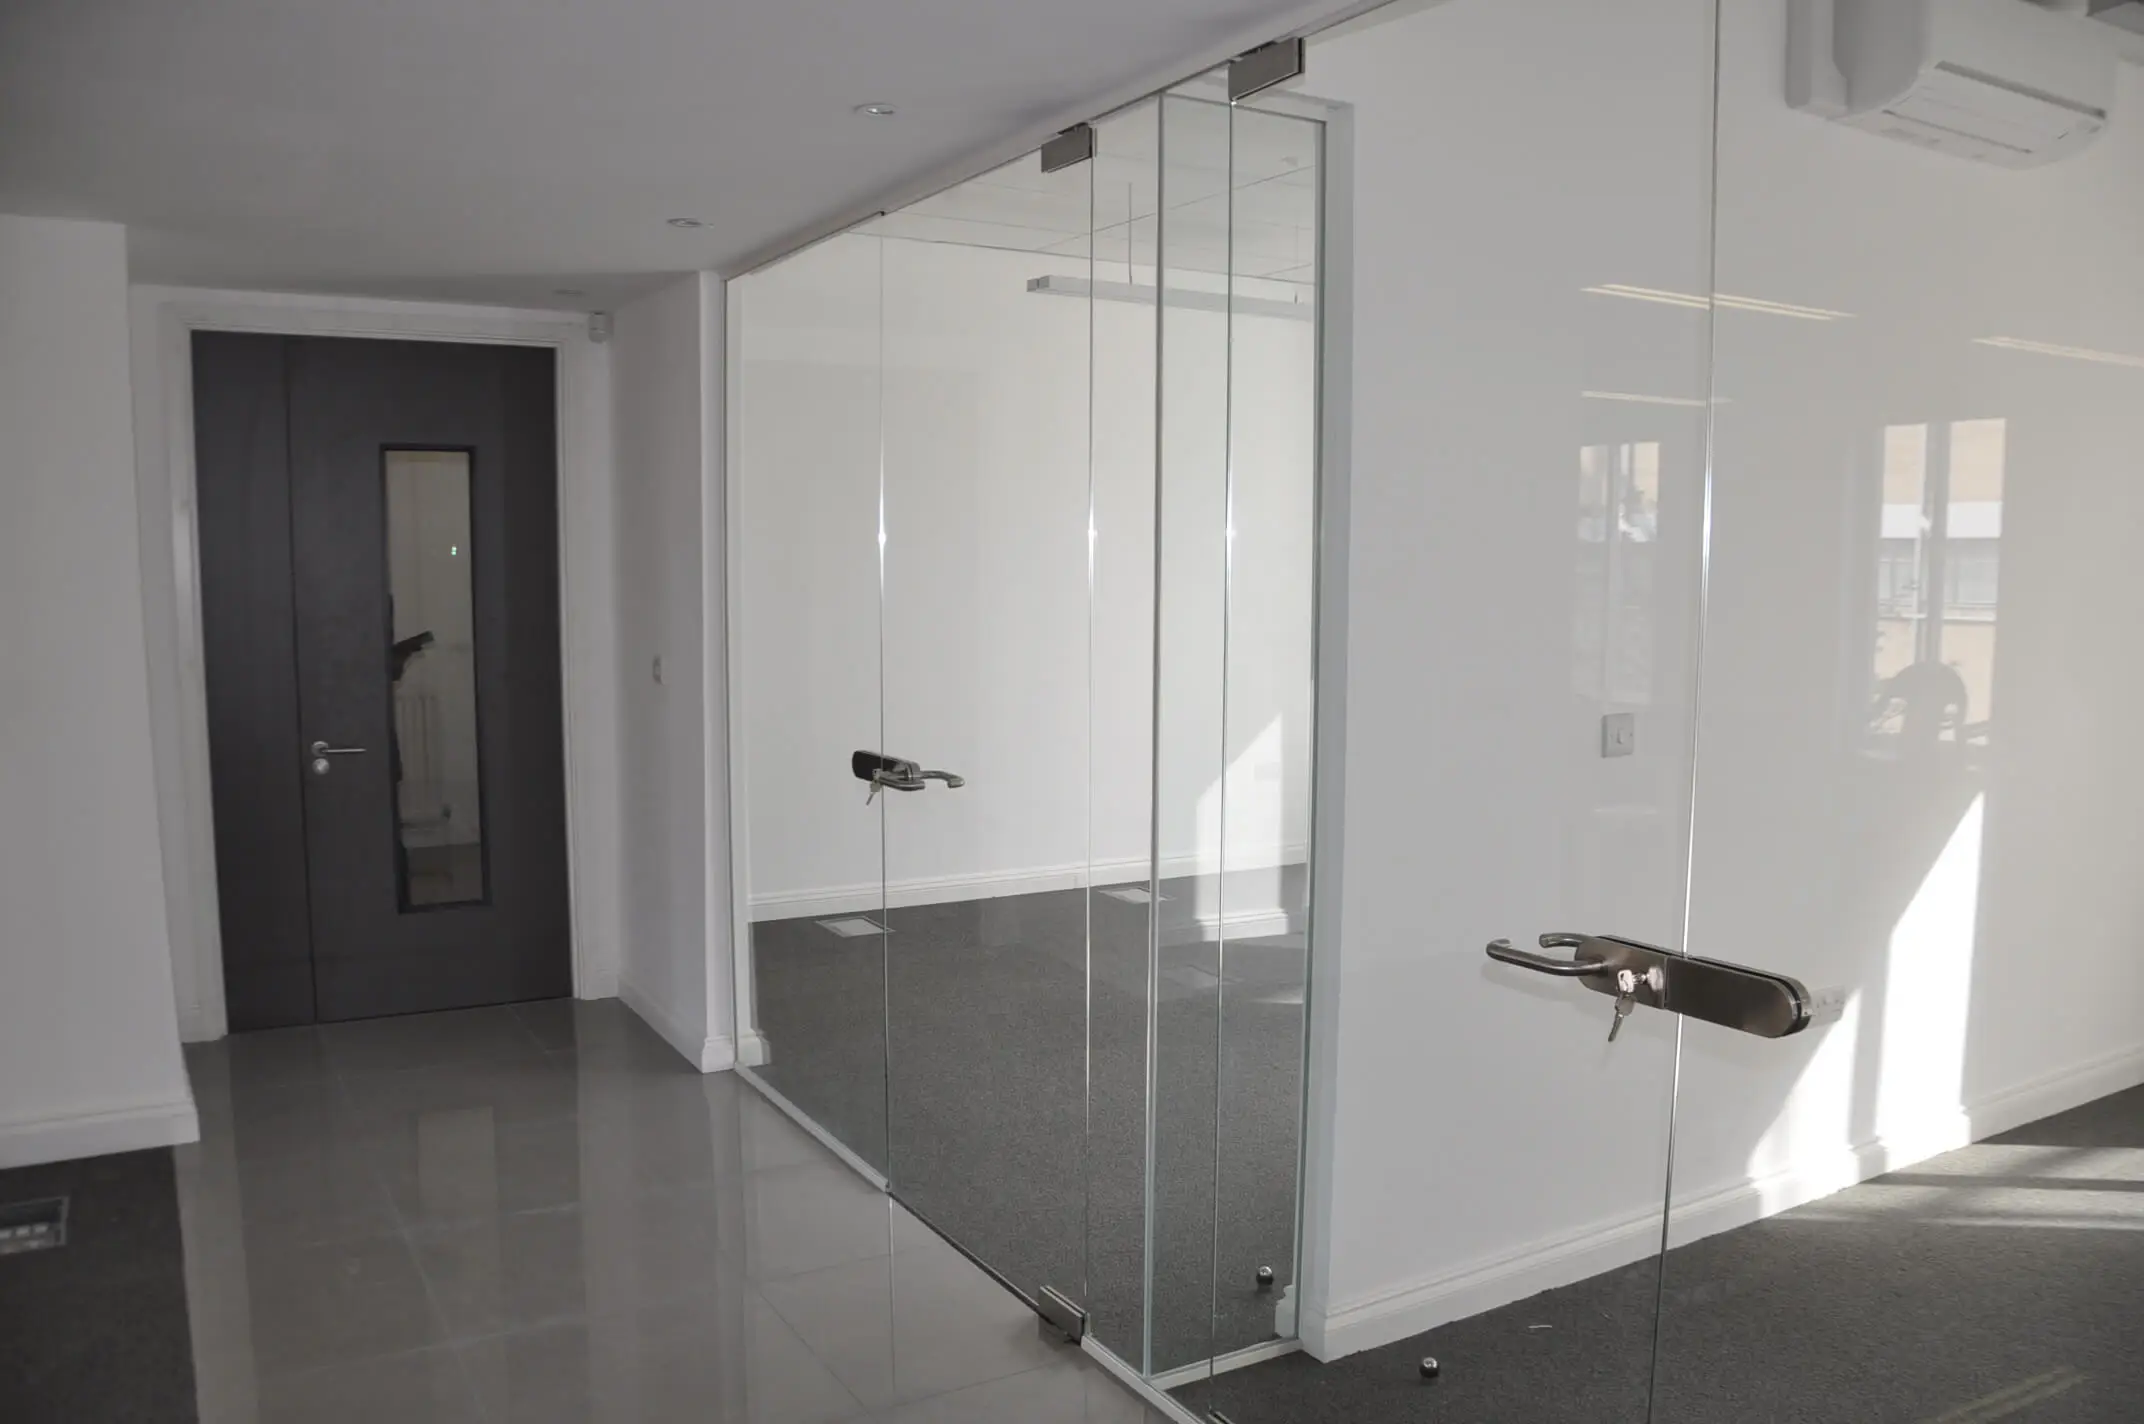 Office with frameless glass doors with lock